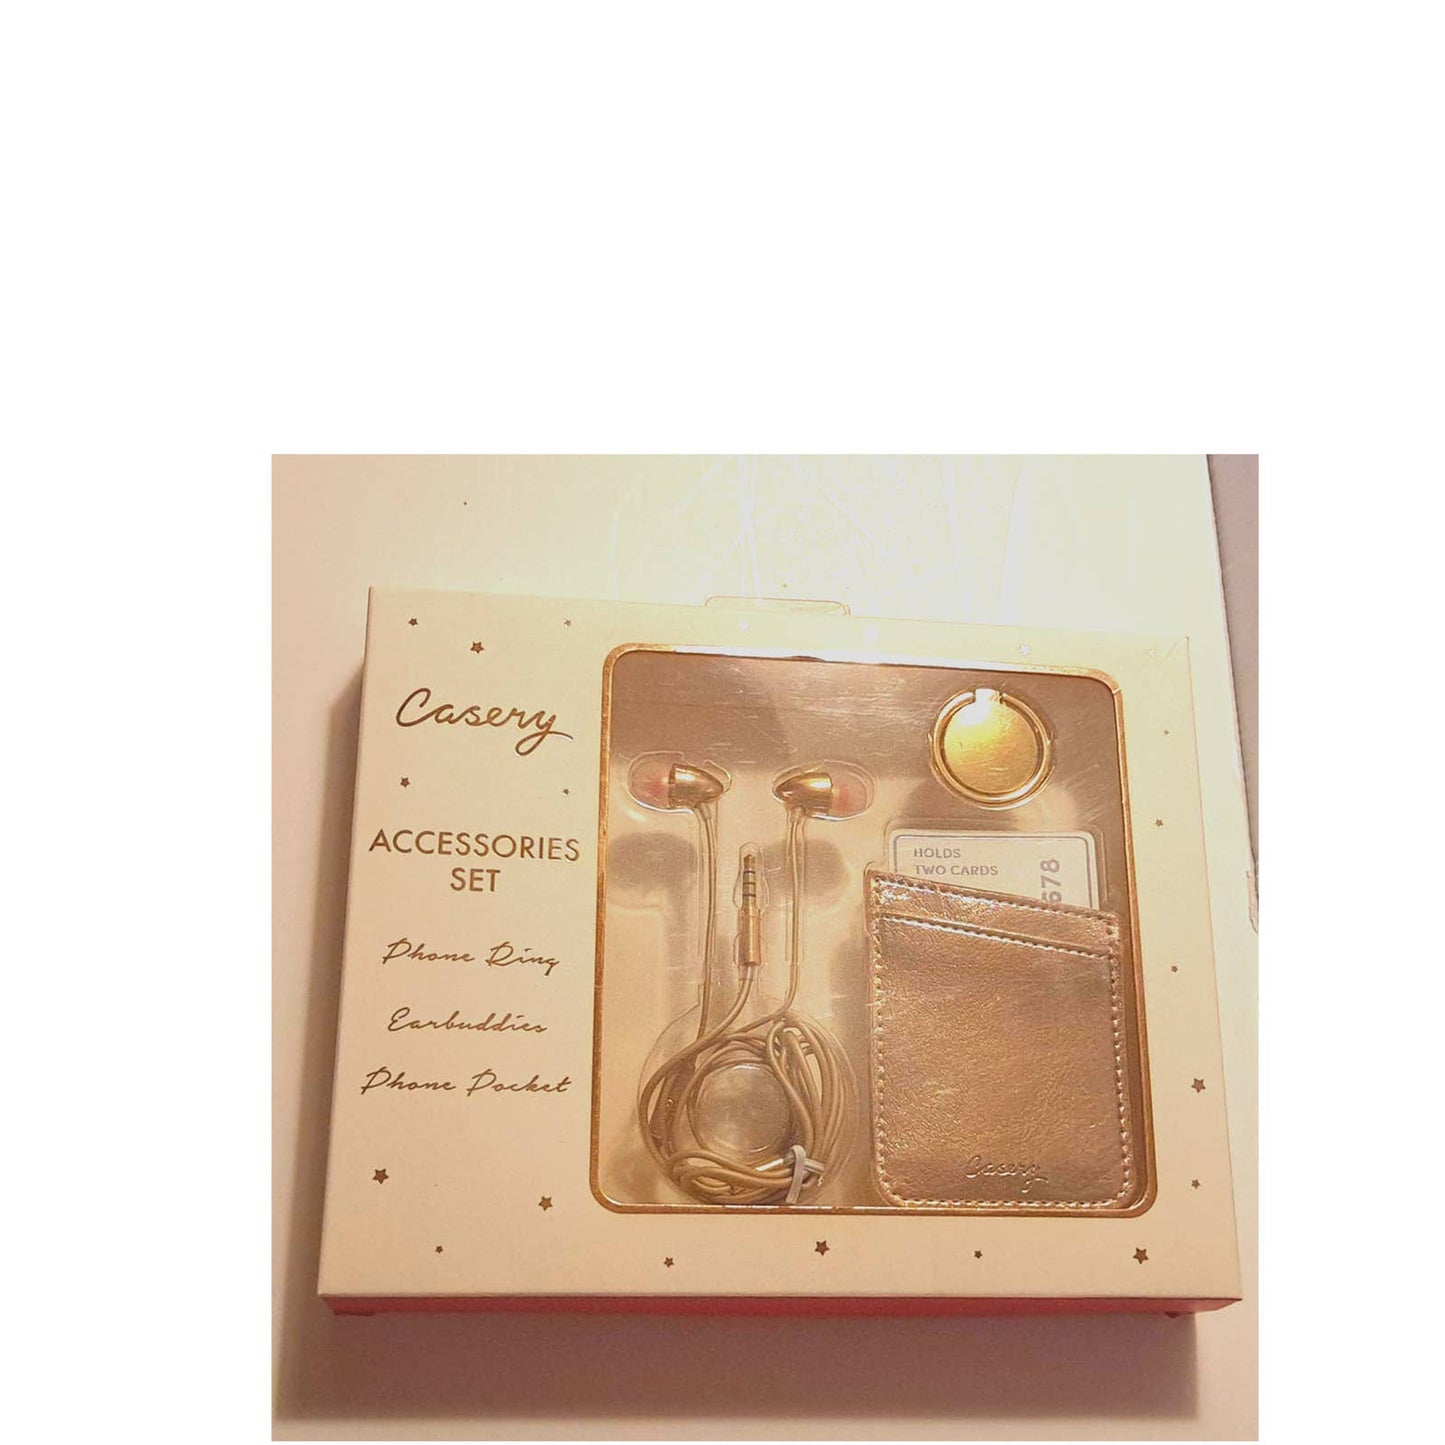 CASERY pink-gold Accessories set includes phone ring, ear buddies & phone pocket